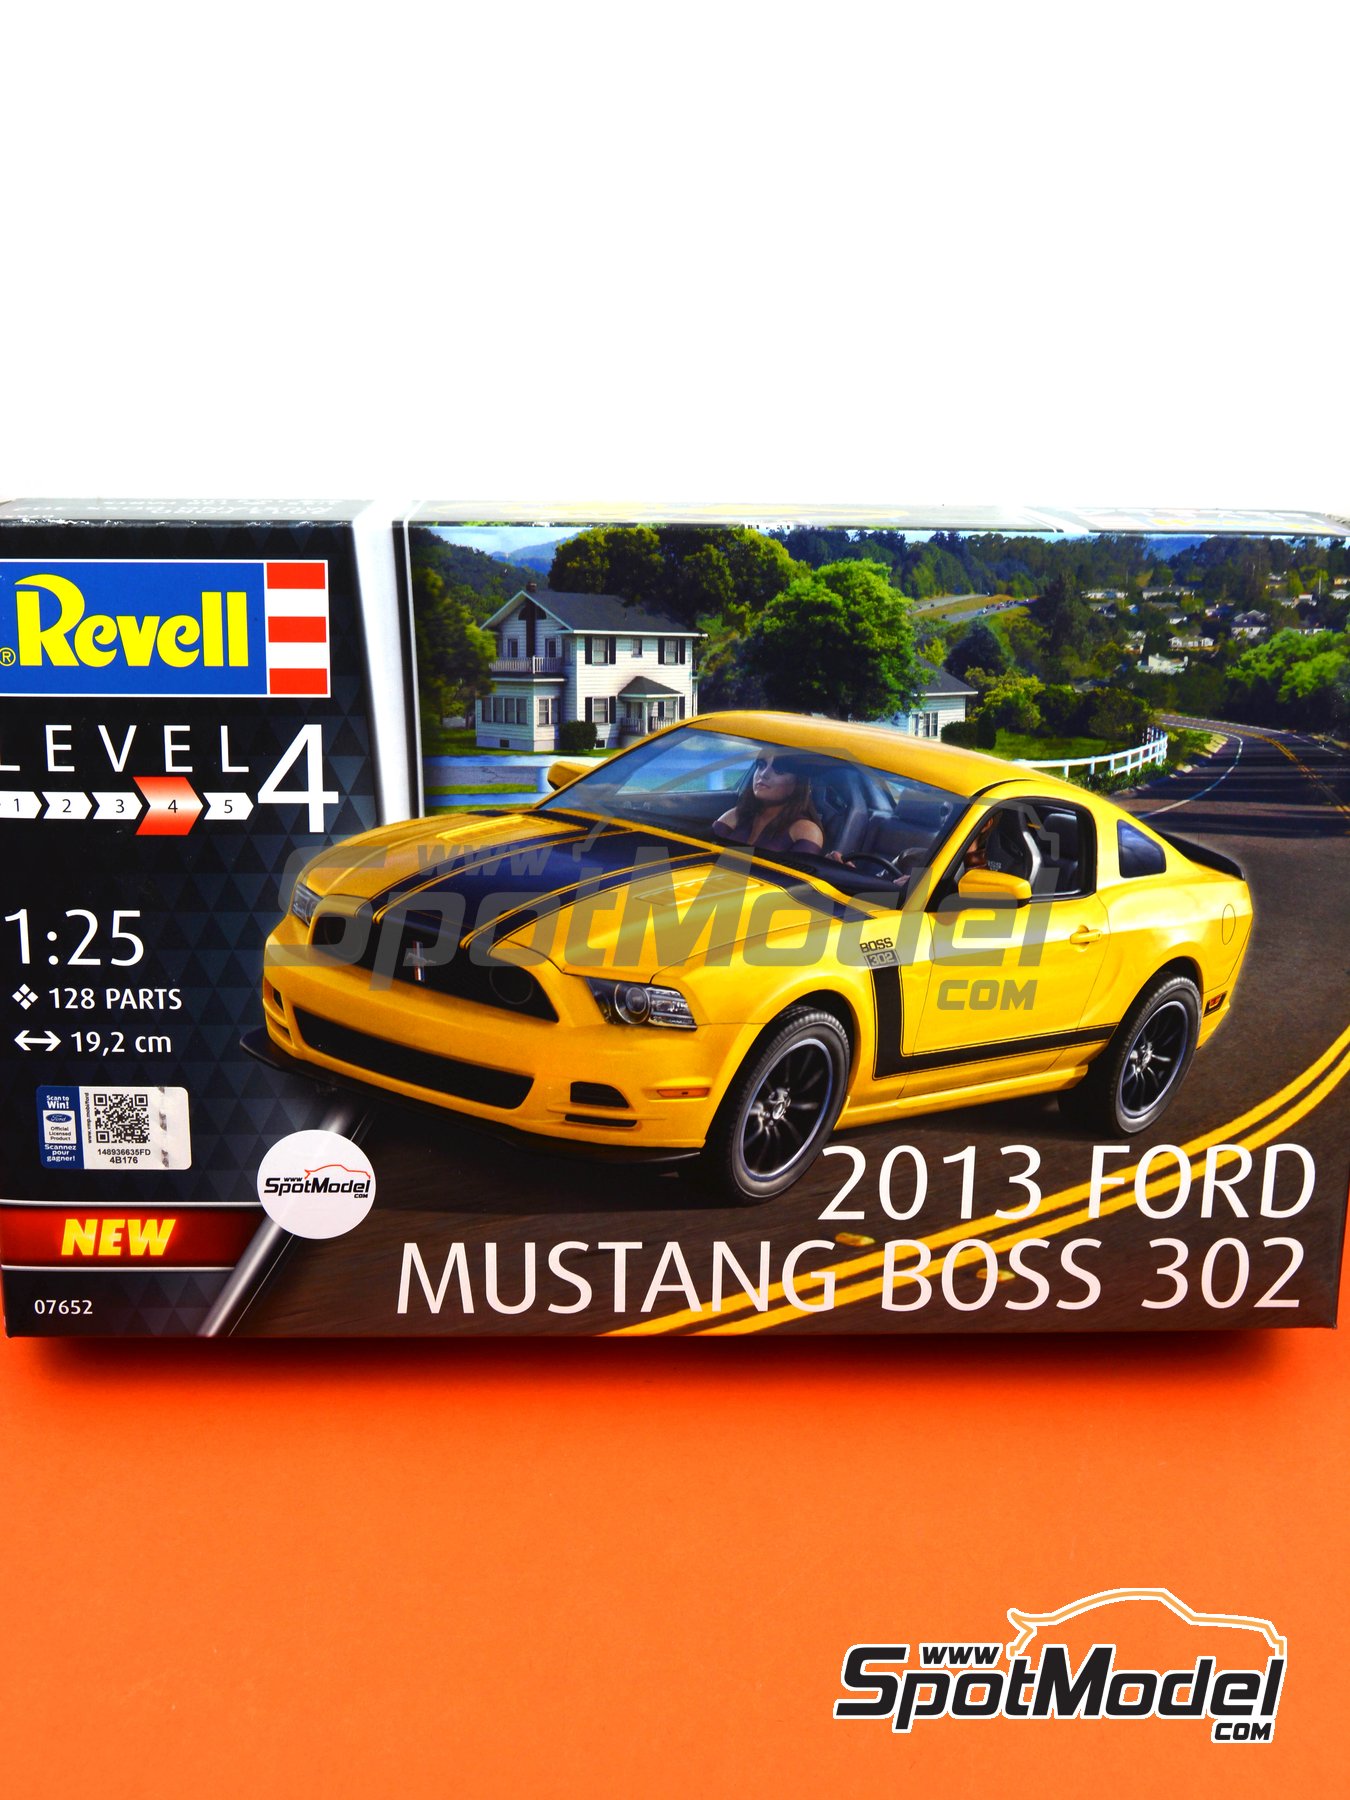 Revell 14187 1:25th scale 2013 Ford Mustang Boss 302 Revell Muscle series 